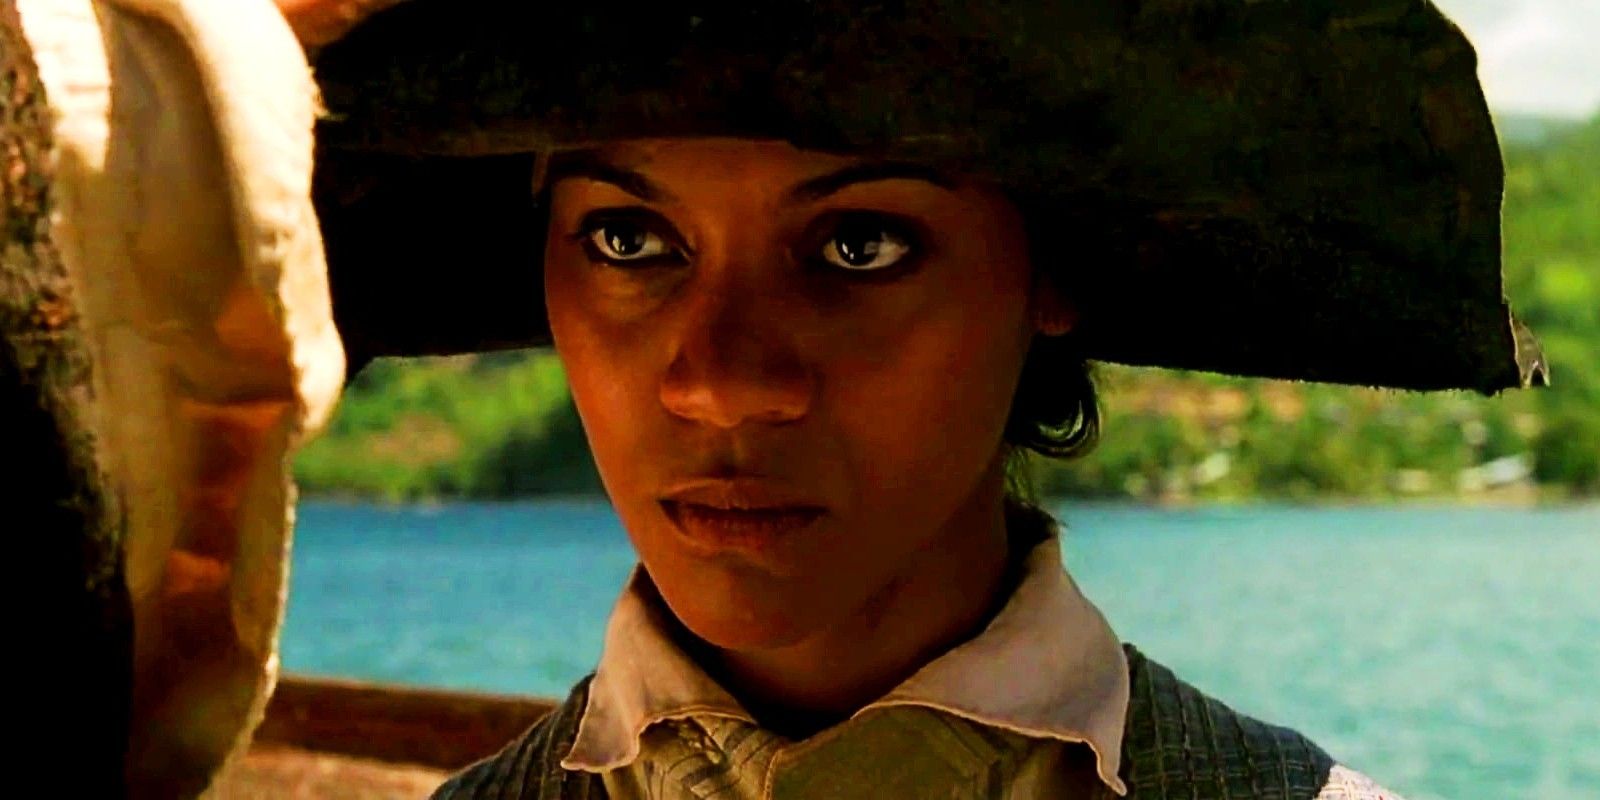 Why Zoe Saldaña’s Pirates Of The Caribbean Filming Experience Is “Not Worth Repeating”